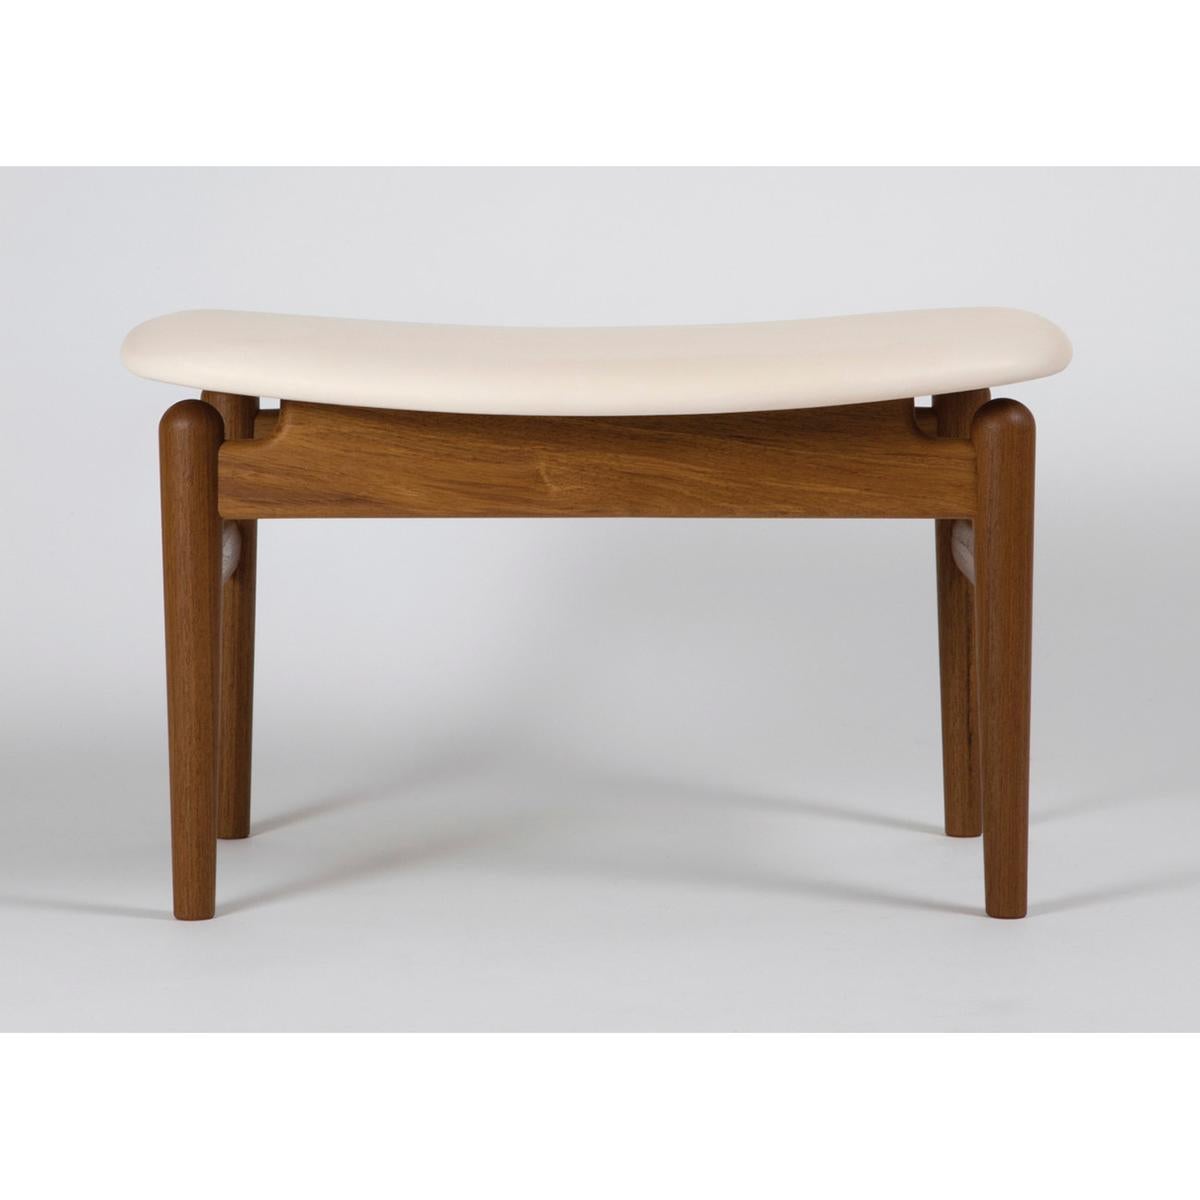 Chieftain footstool designed by Finn Juhl in 1953, relaunched in 2015.
Manufactured by House of Finn Juhl in Denmark.

This stool was made for the iconic Chieftain chair, one of Finn Juhl’s absolute masterpieces.

Today the Chieftain is perceived as